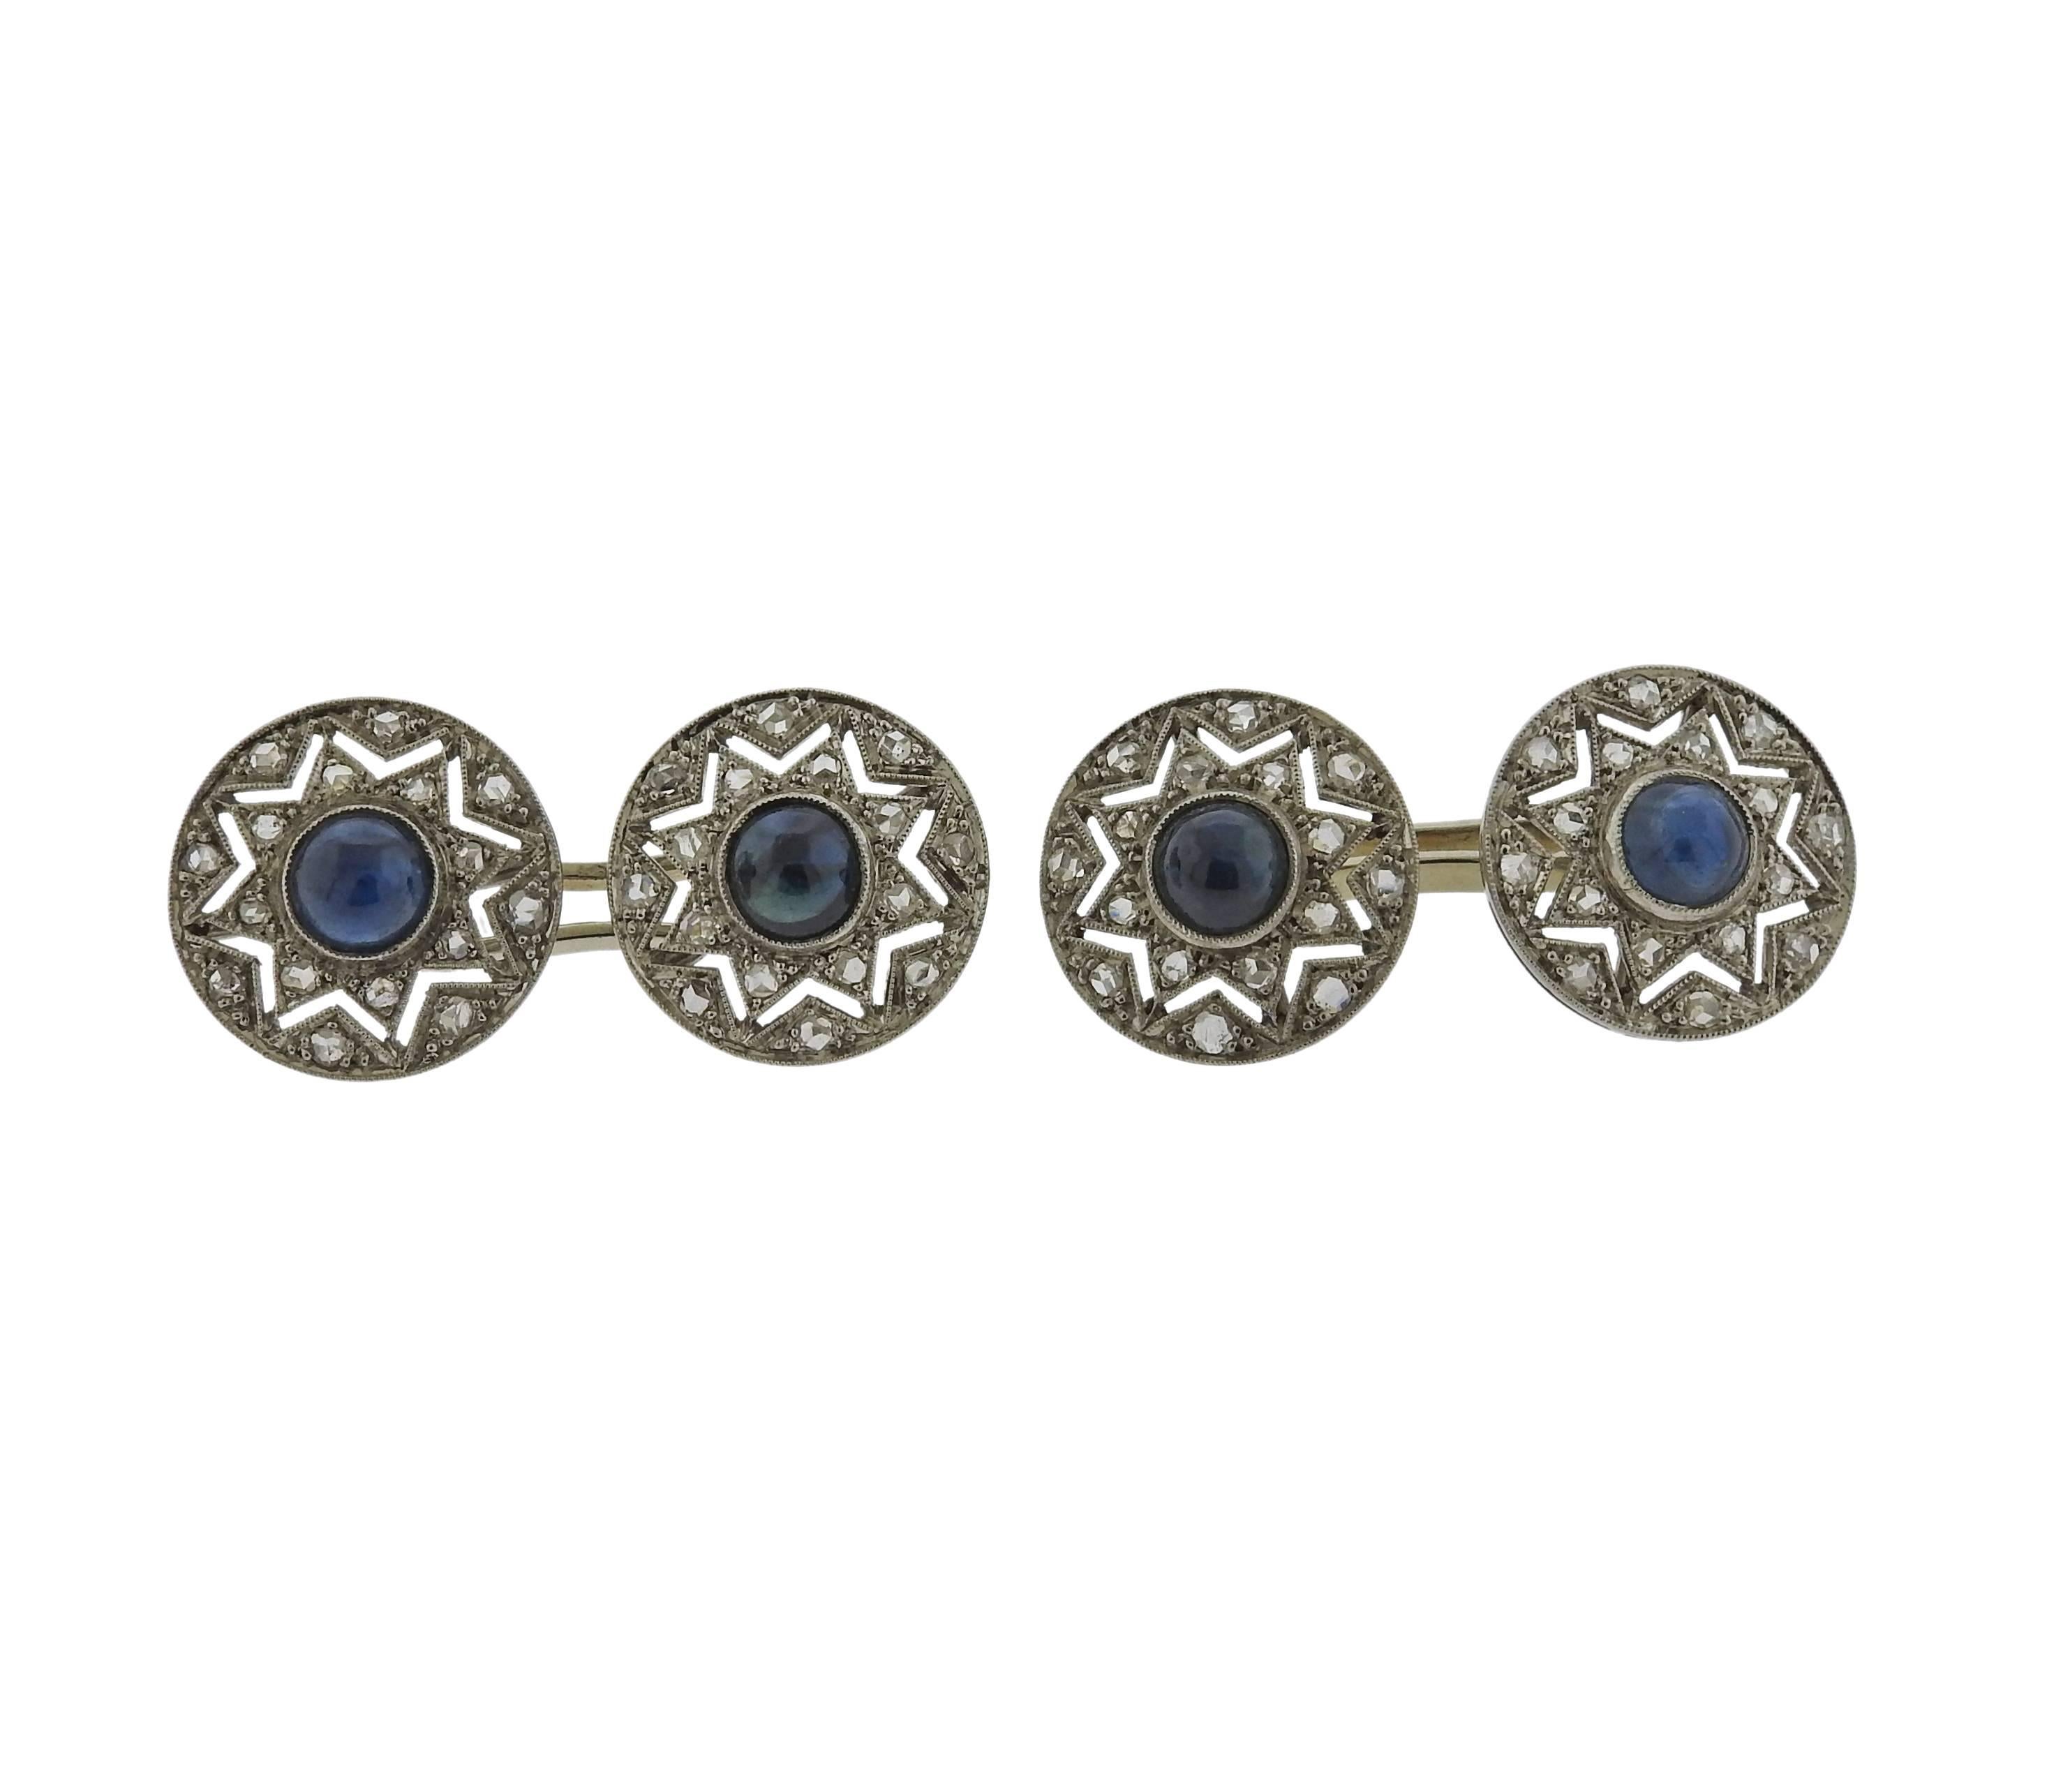 A pair of platinum art deco cufflinks featuring rose cut diamonds and sapphire cabochons. Cufflink tops measure 14.4mm in diameter. Weight is 10.7 grams. 